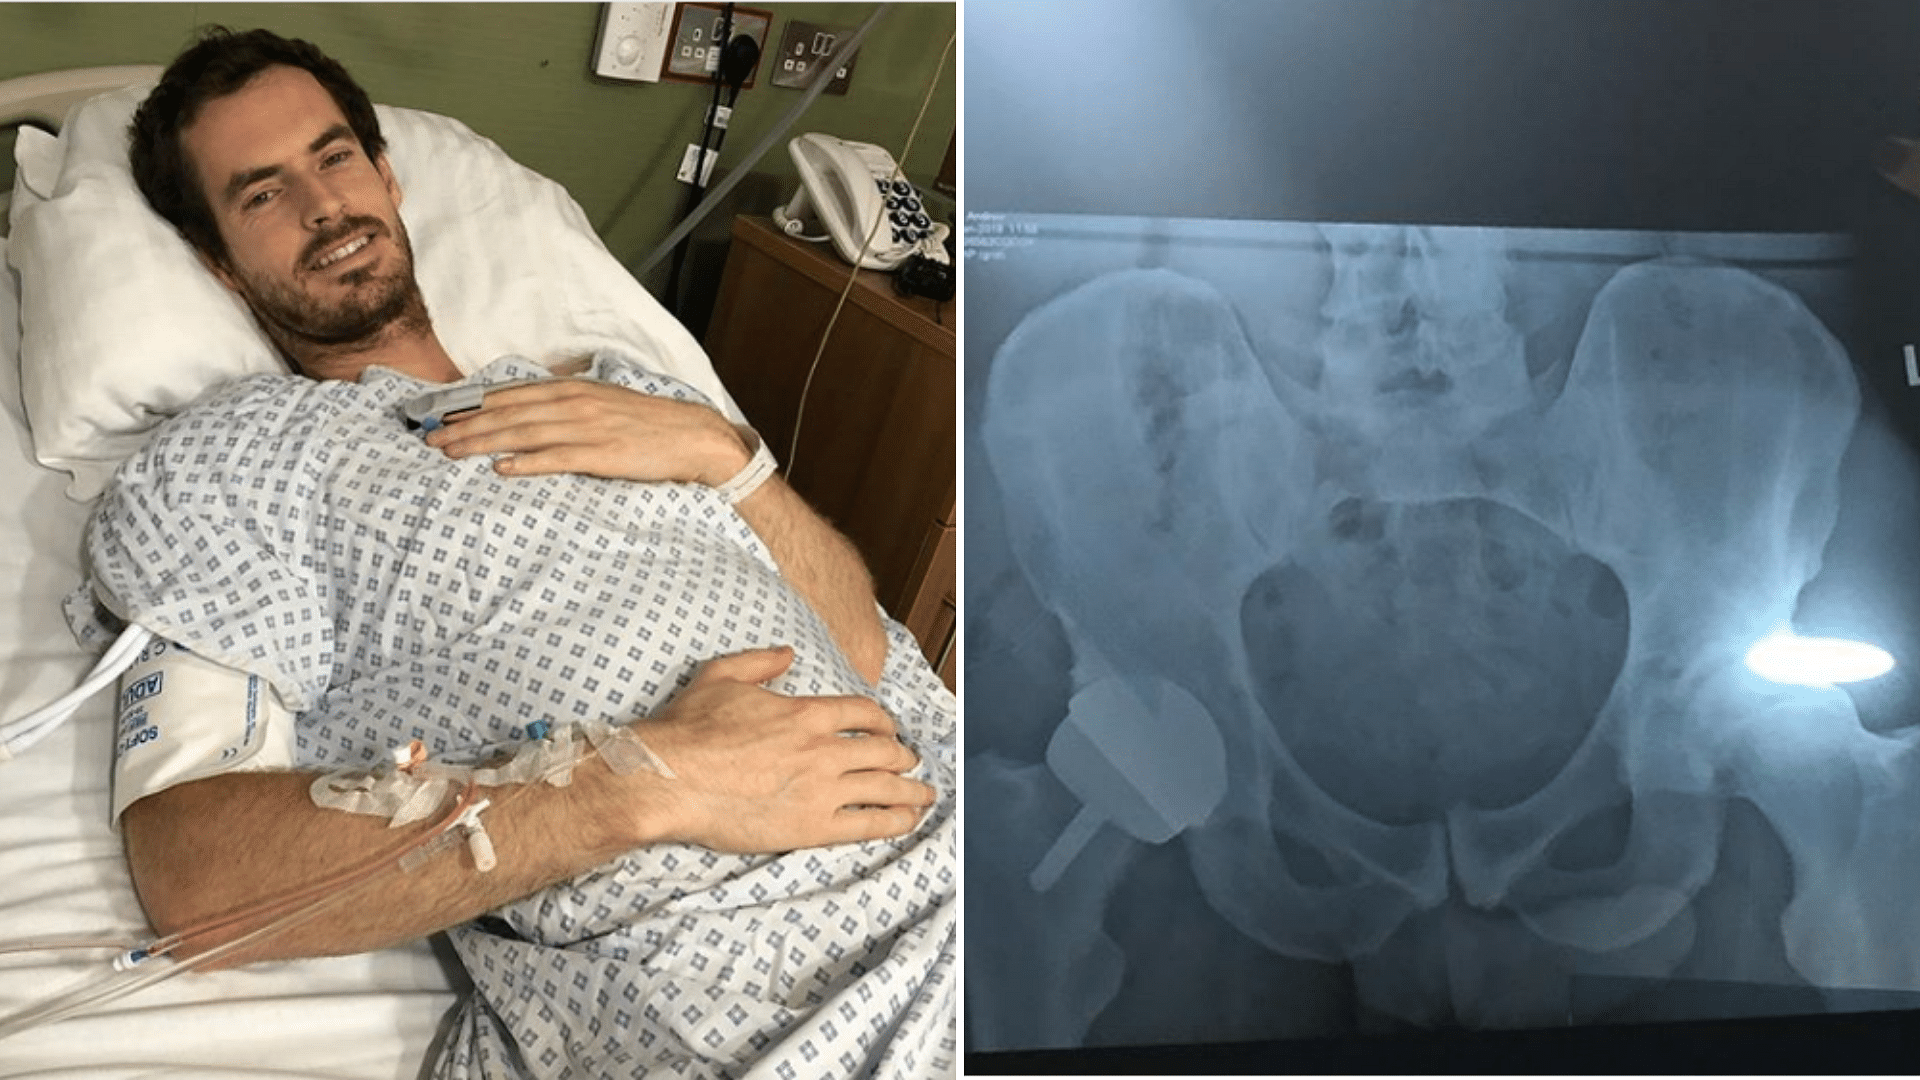 Three-time major winner Andy Murray shared pictures after undergoing a second surgery on his hip in London on 28 January.